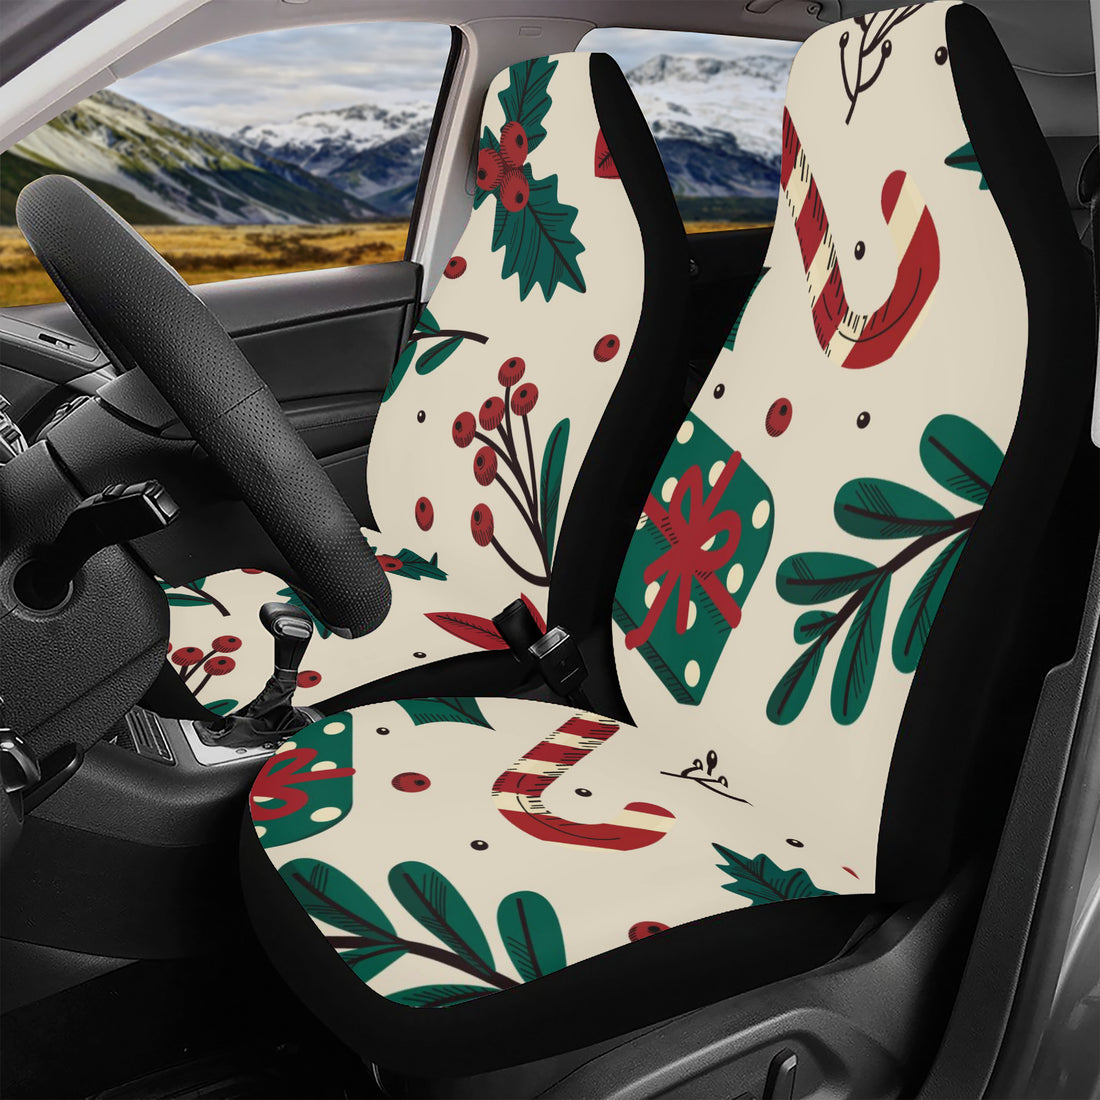 Revamp Your Ride With Festive Flair: Spruce Up Your Car Seat with Stylish Christmas Covers! Home-clothes-jewelry